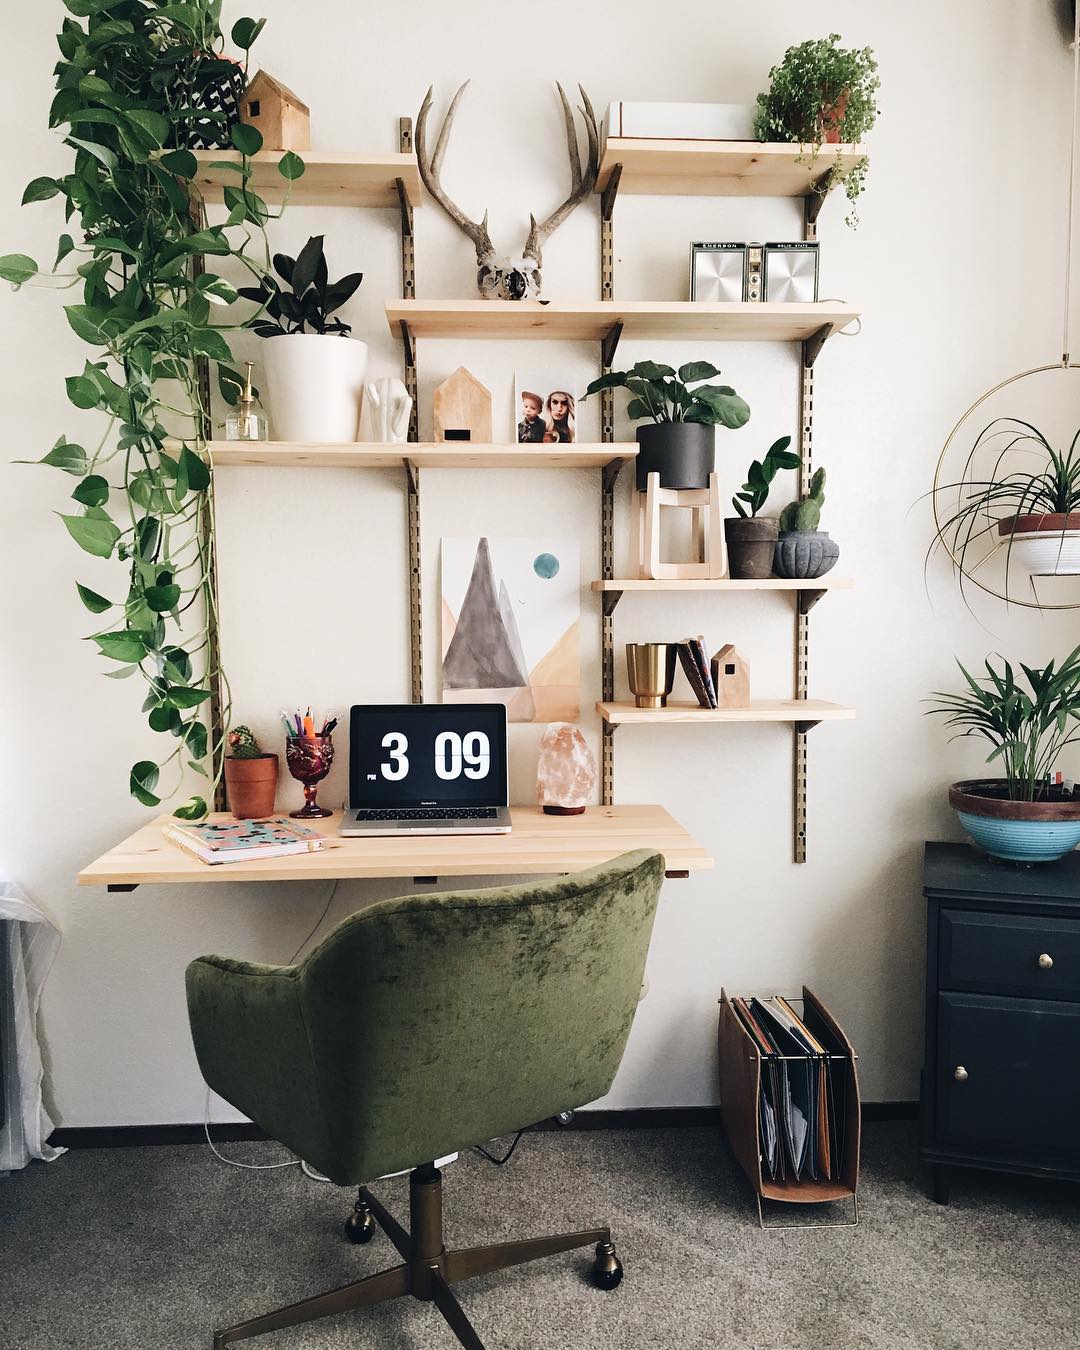 home office with a wall desk set up photo by Instagram user @milkandthistle_